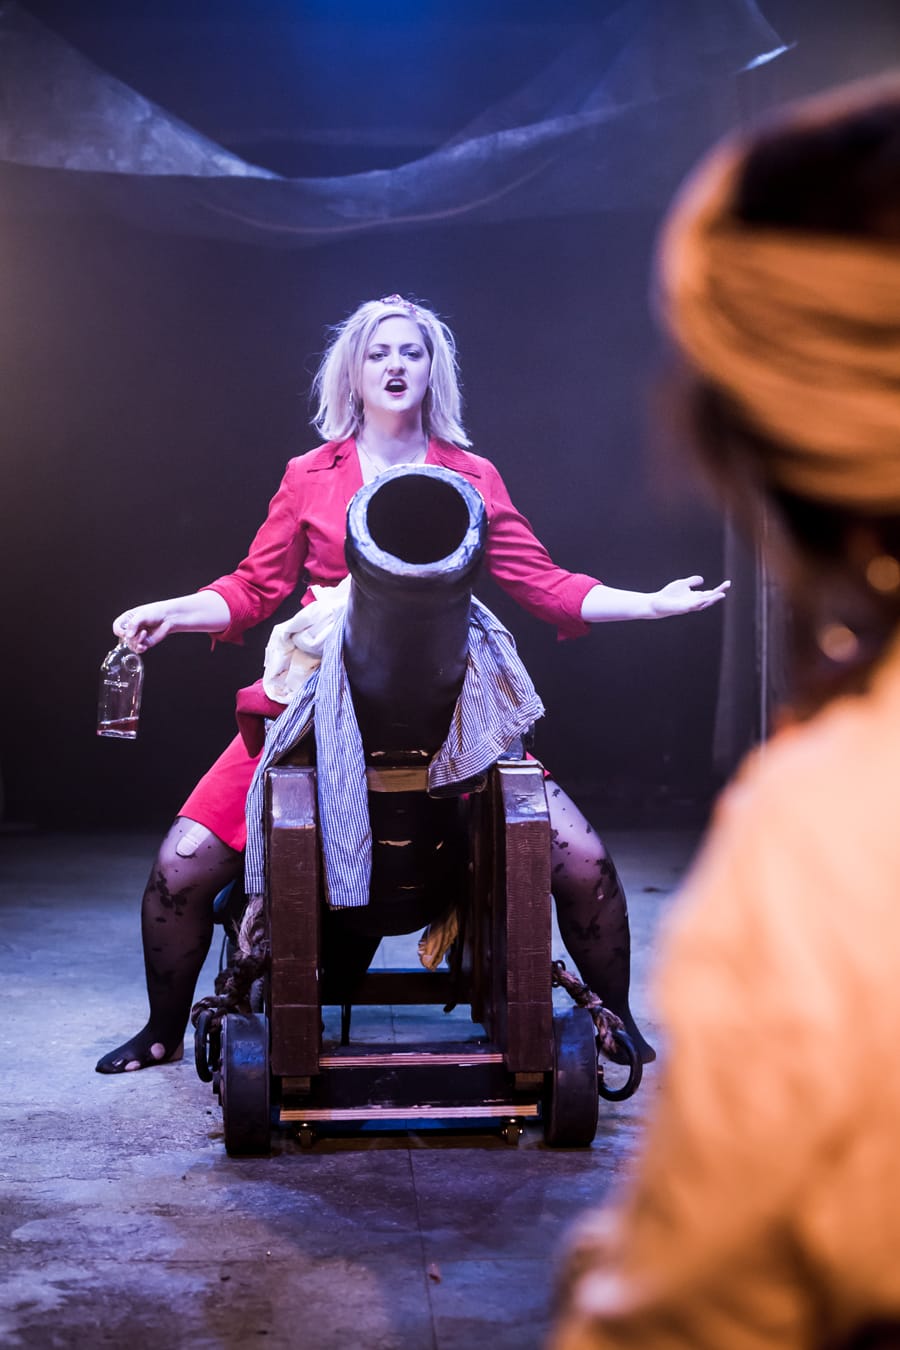 Mother Courage and her Children at Southwark Playhouse